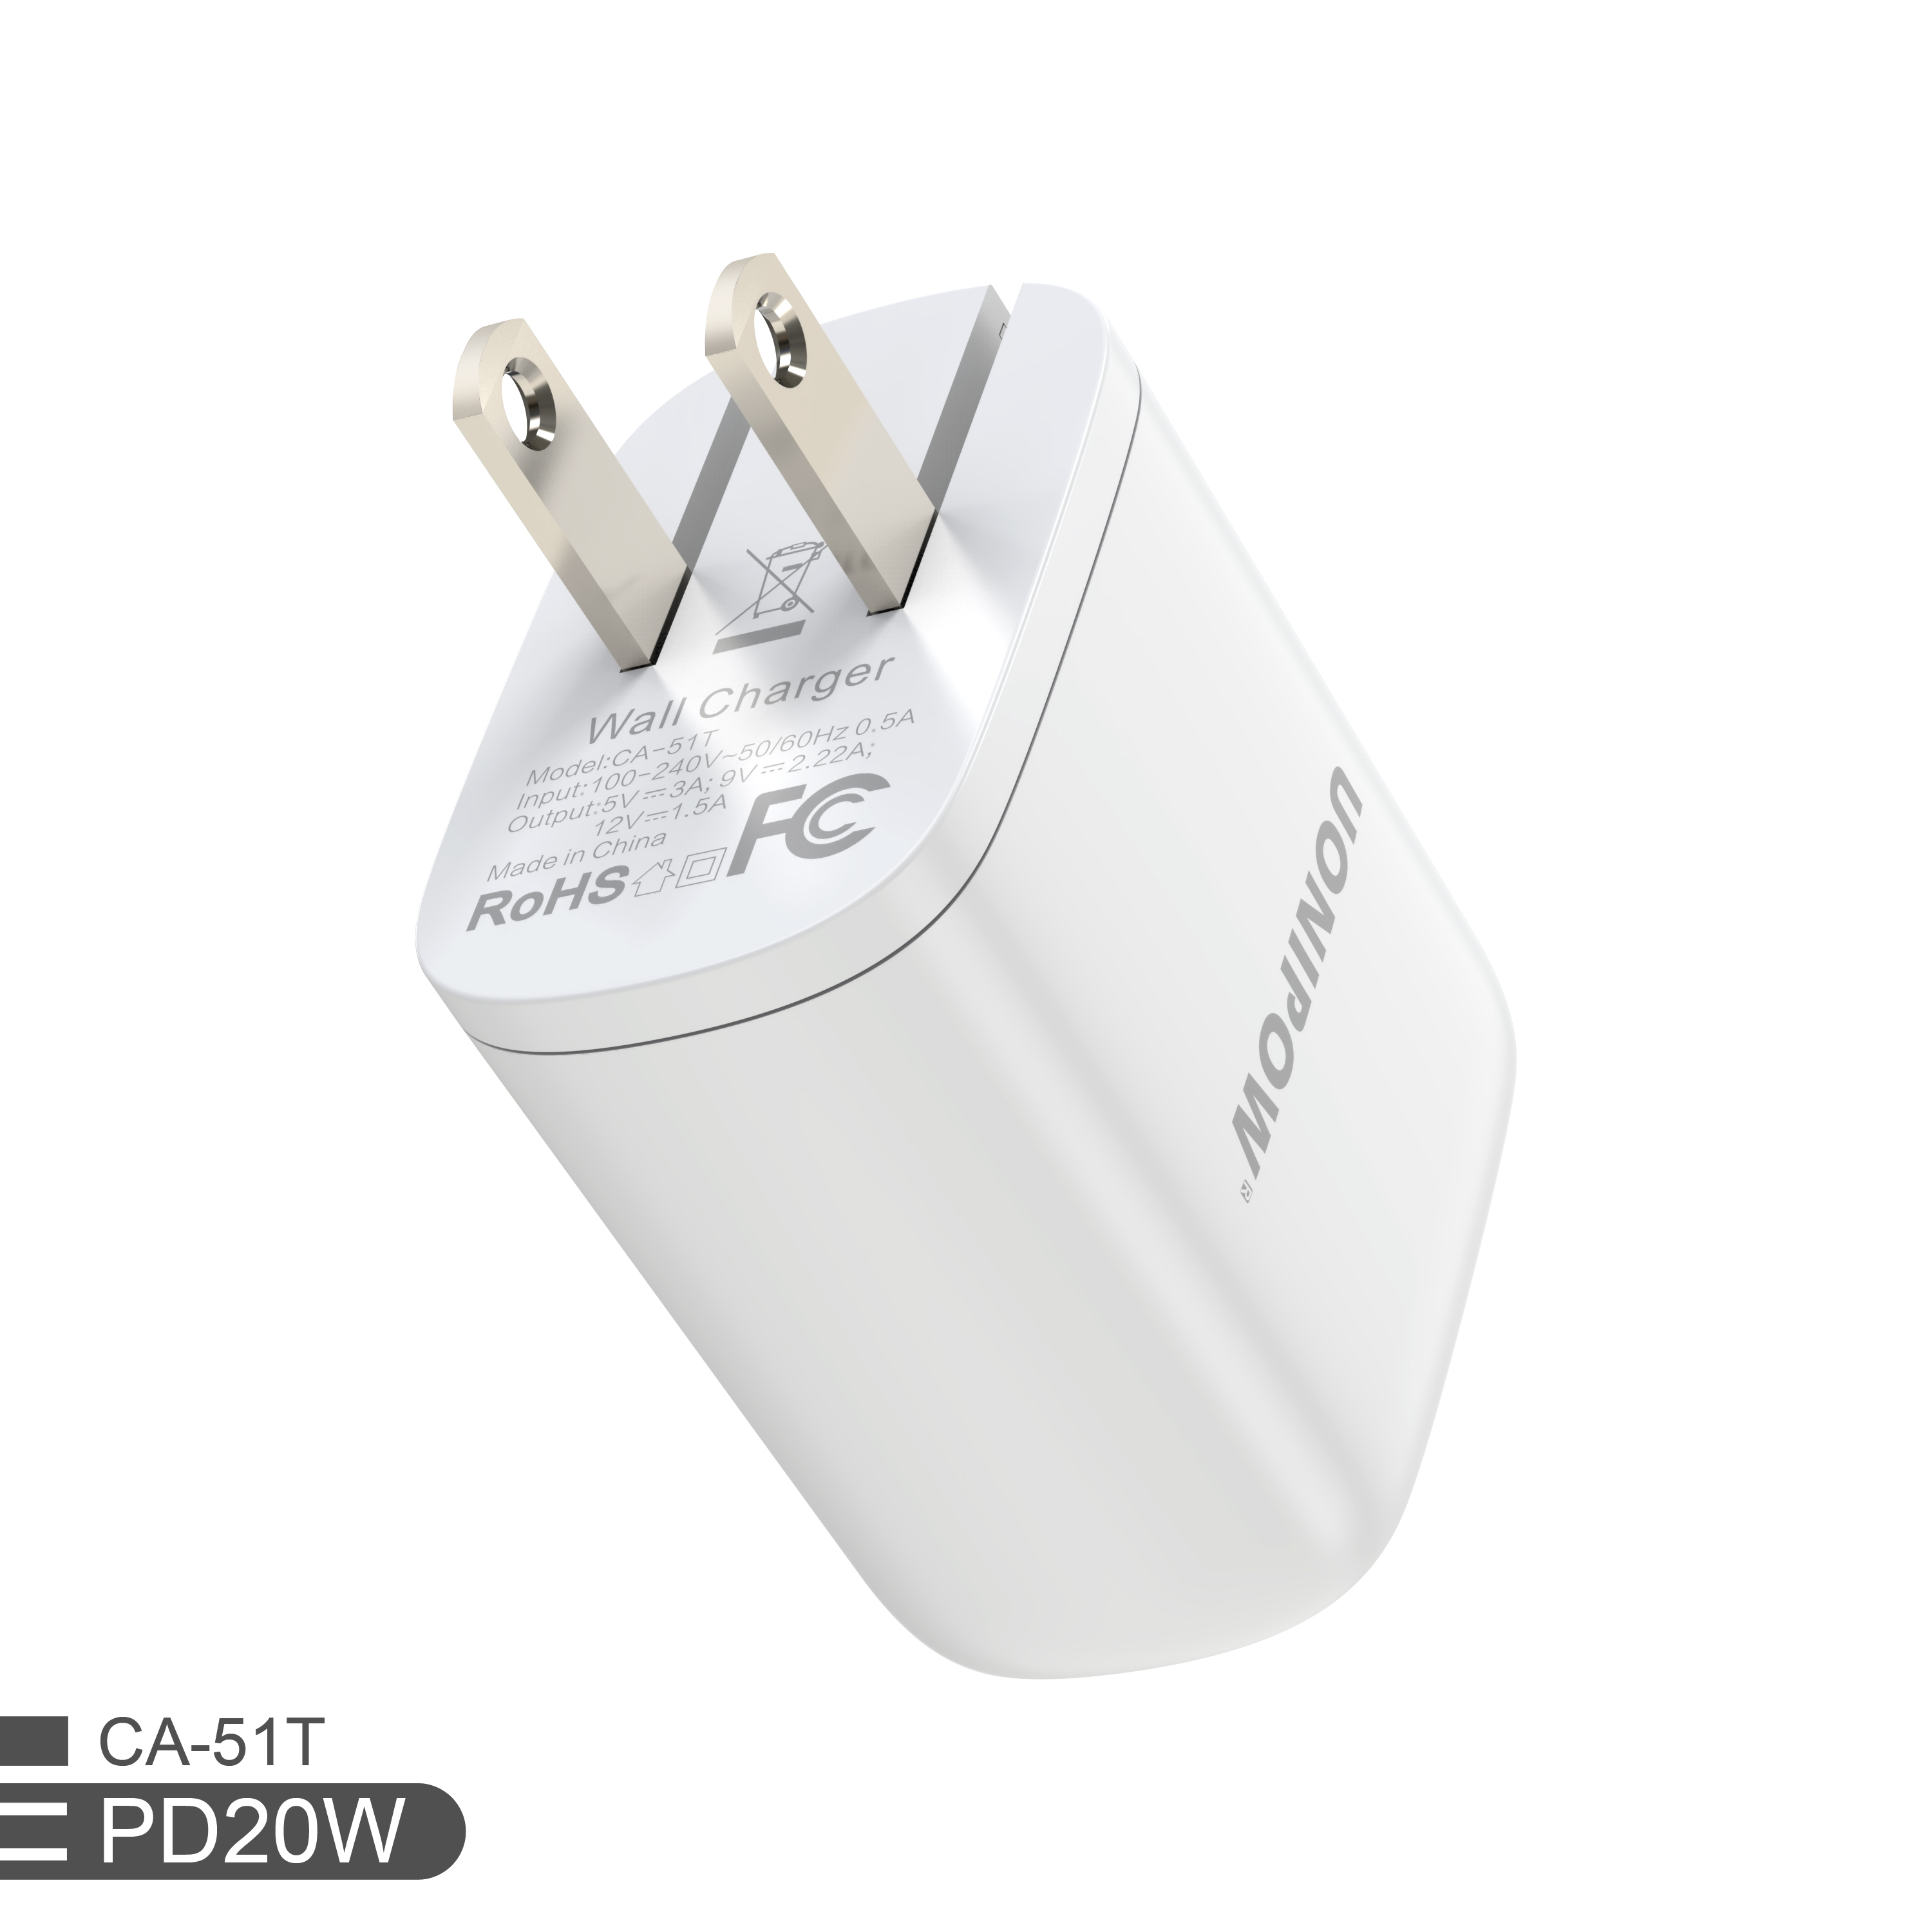 Wall charger fast charging PD 18W 20W charger